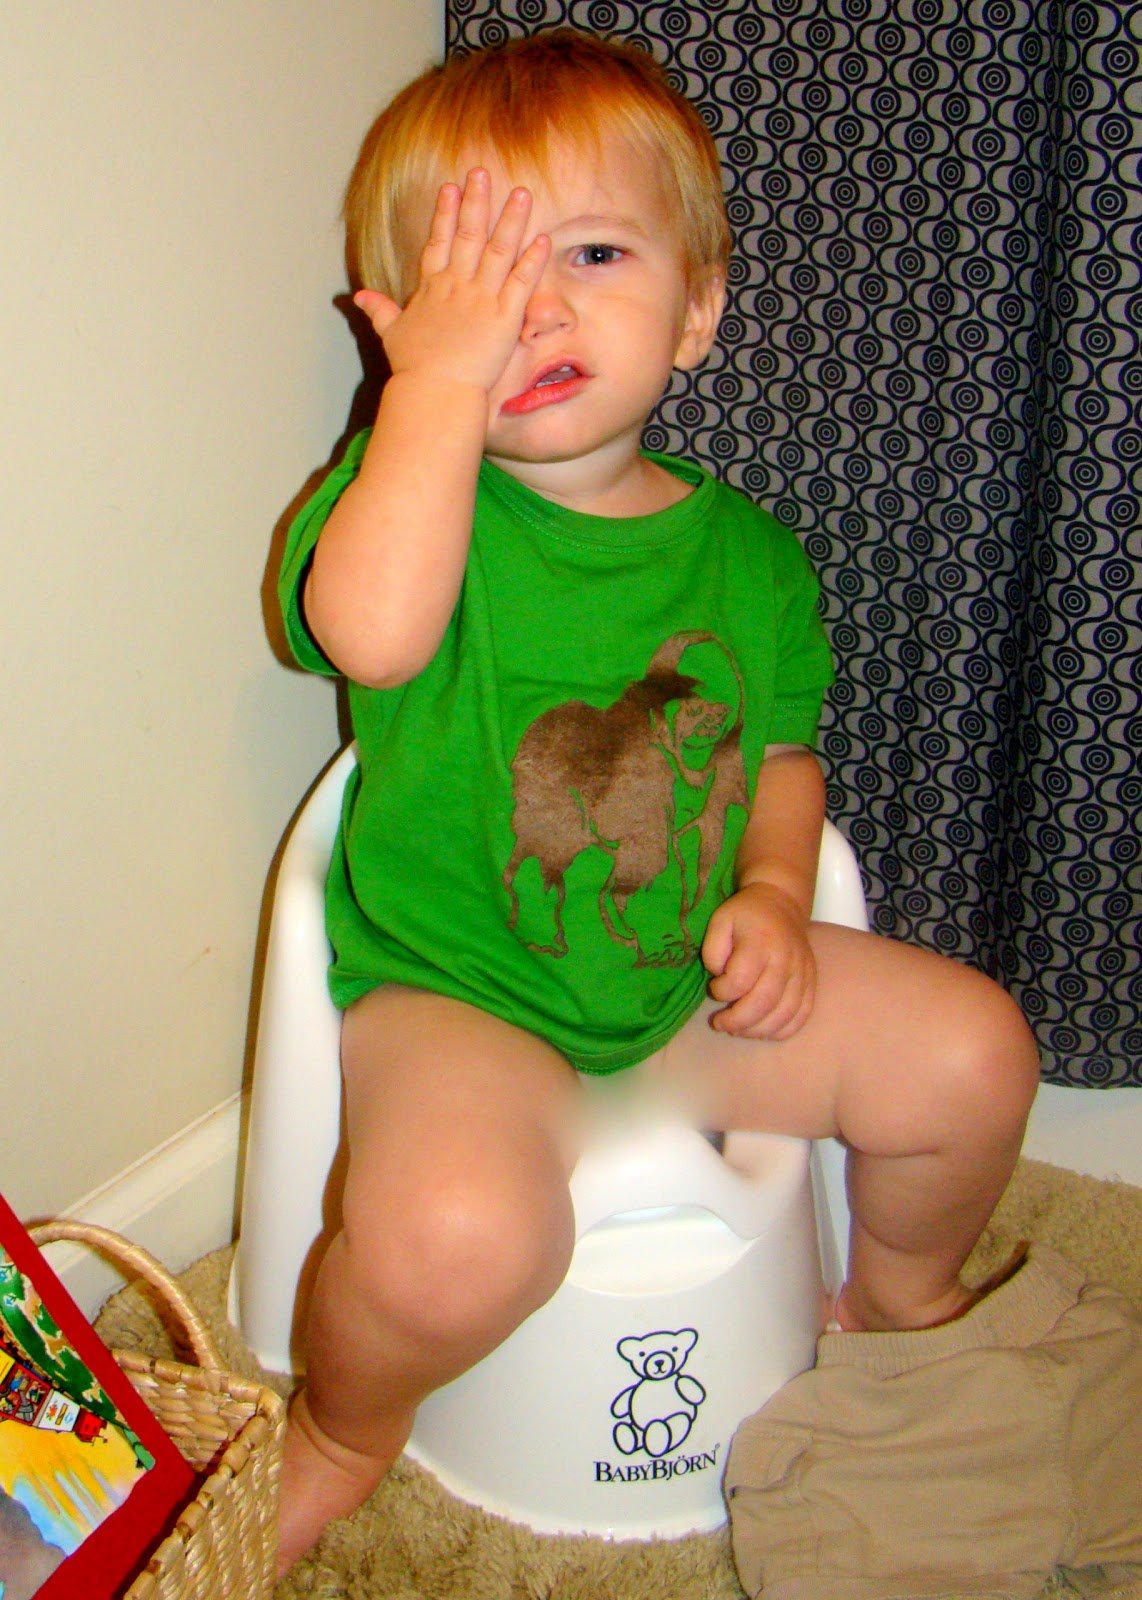 Almost Wordless Wednesday: Potty